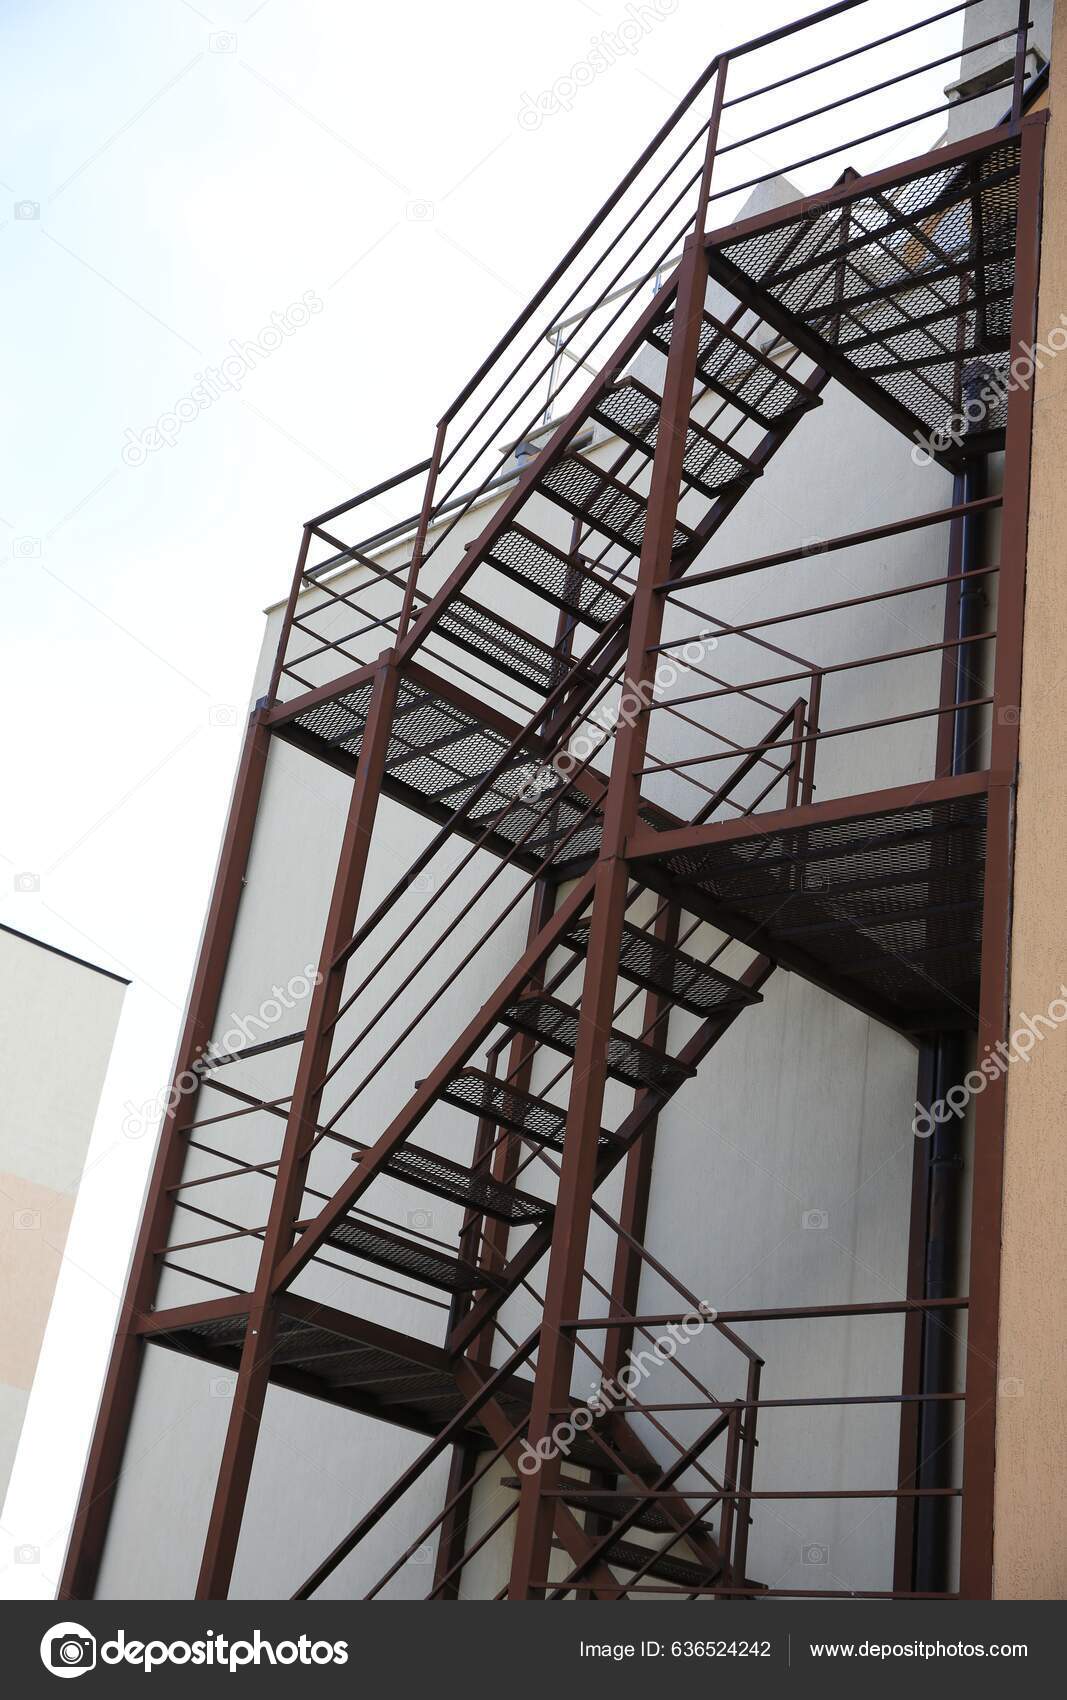 Metal Fire Escape Ladder Building Outdoors Low Angle View Stock